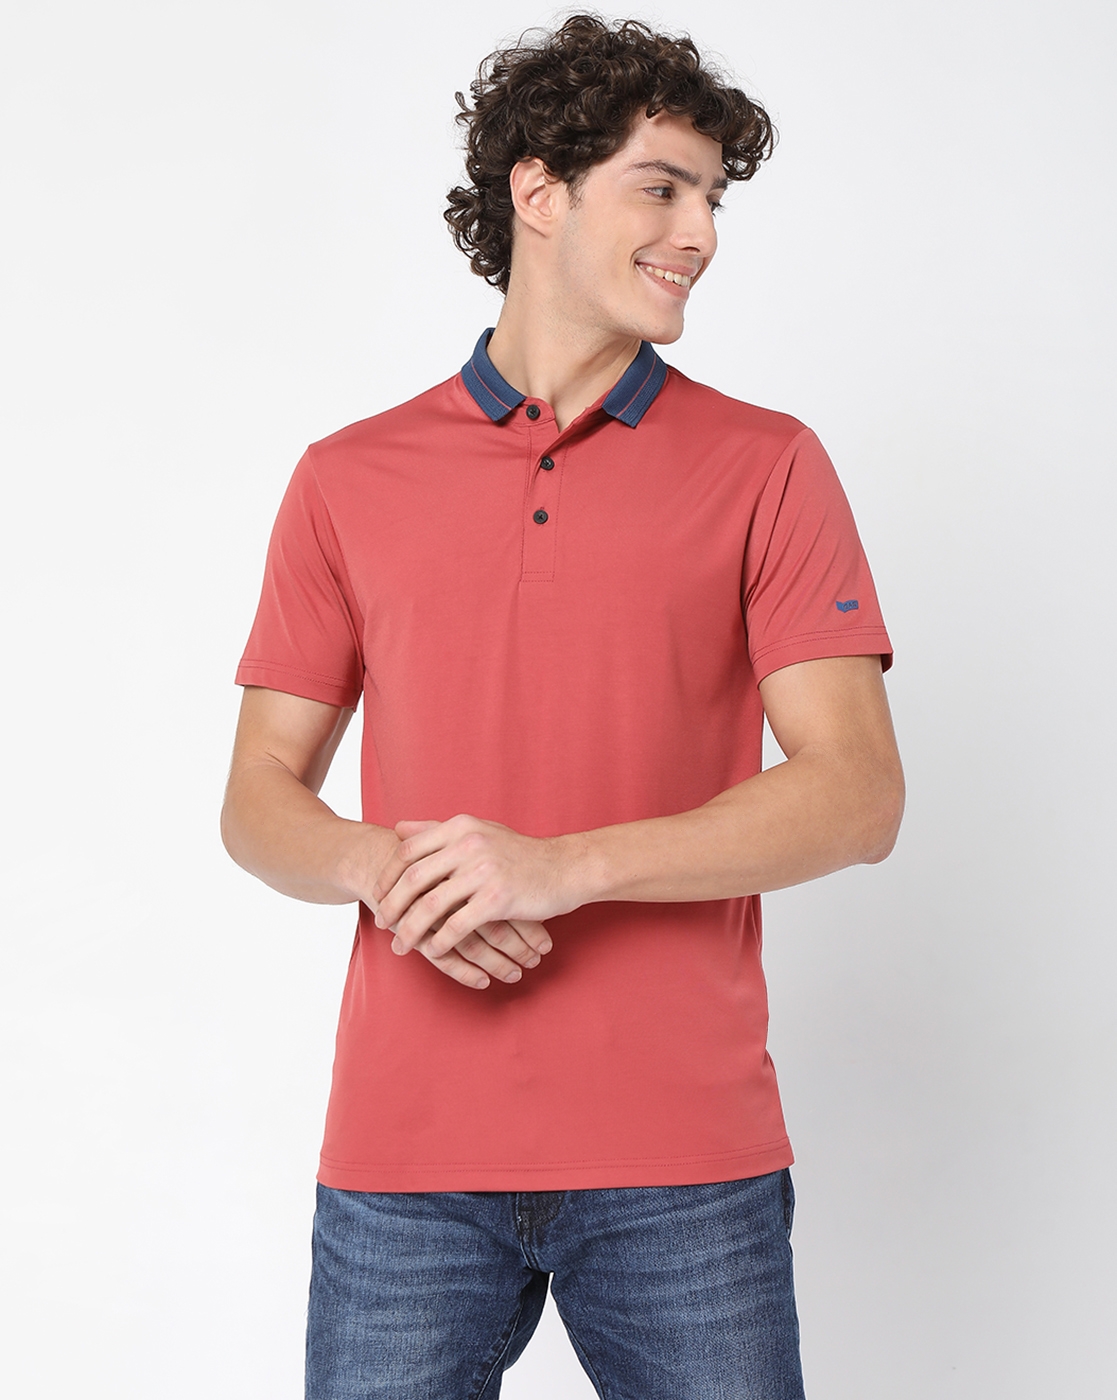 Smart Fit AGAP Baked Apple Polo T-Shirt